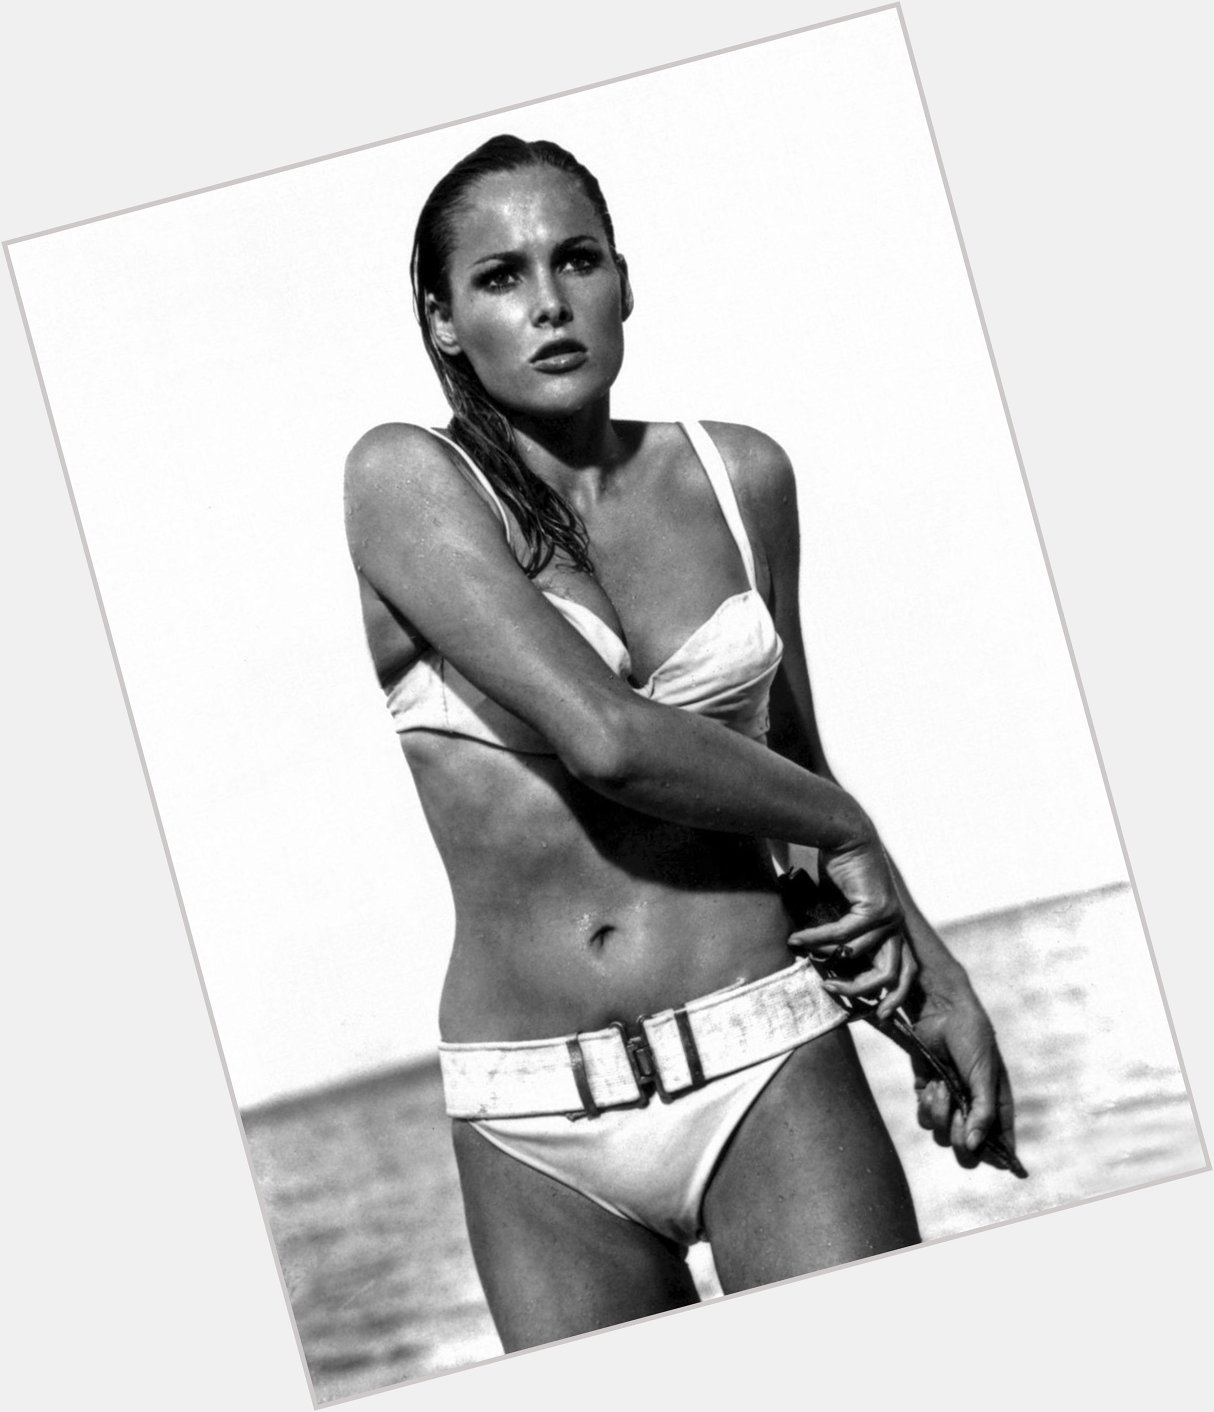 Wishing Ursula Andress a very happy 83rd birthday!
Seen here as Honey Ryder in Dr. No (1962). 